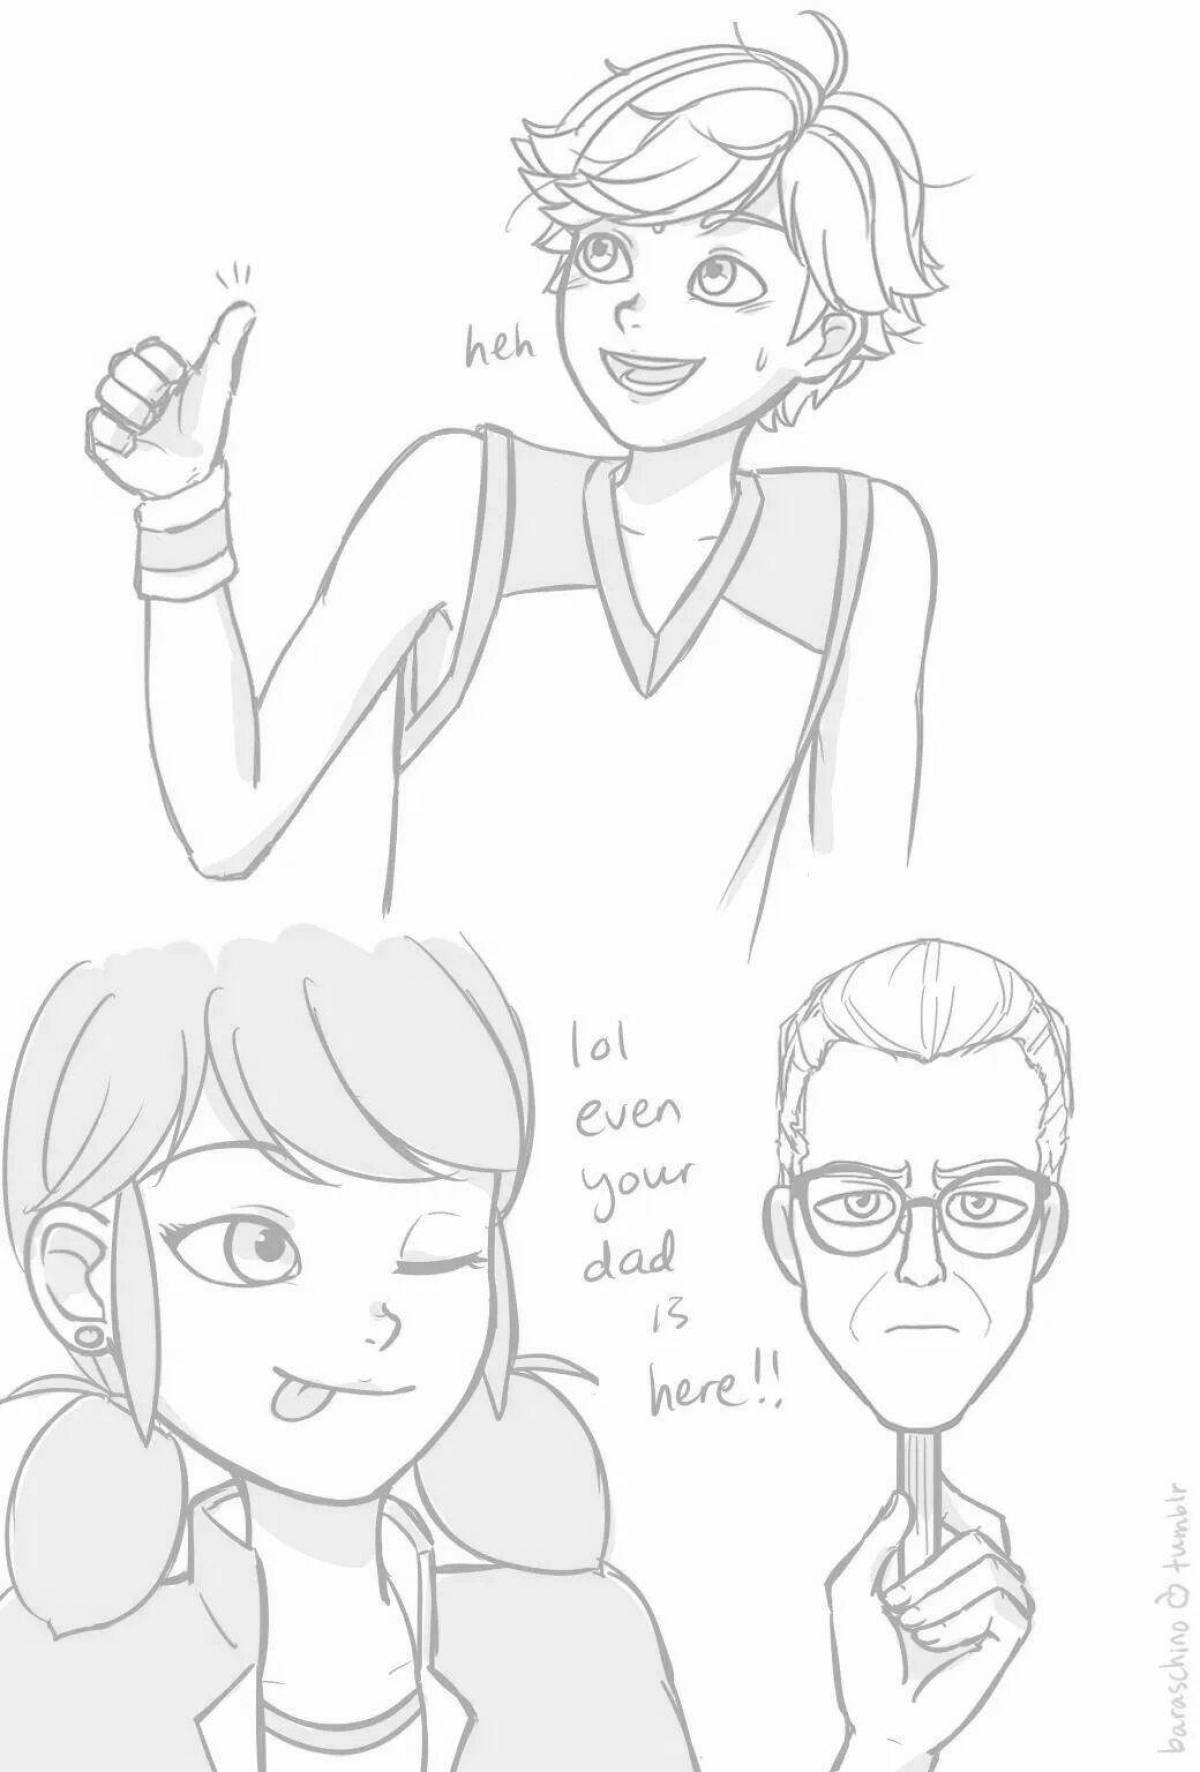 Outrageous marinette and adrien coloring book